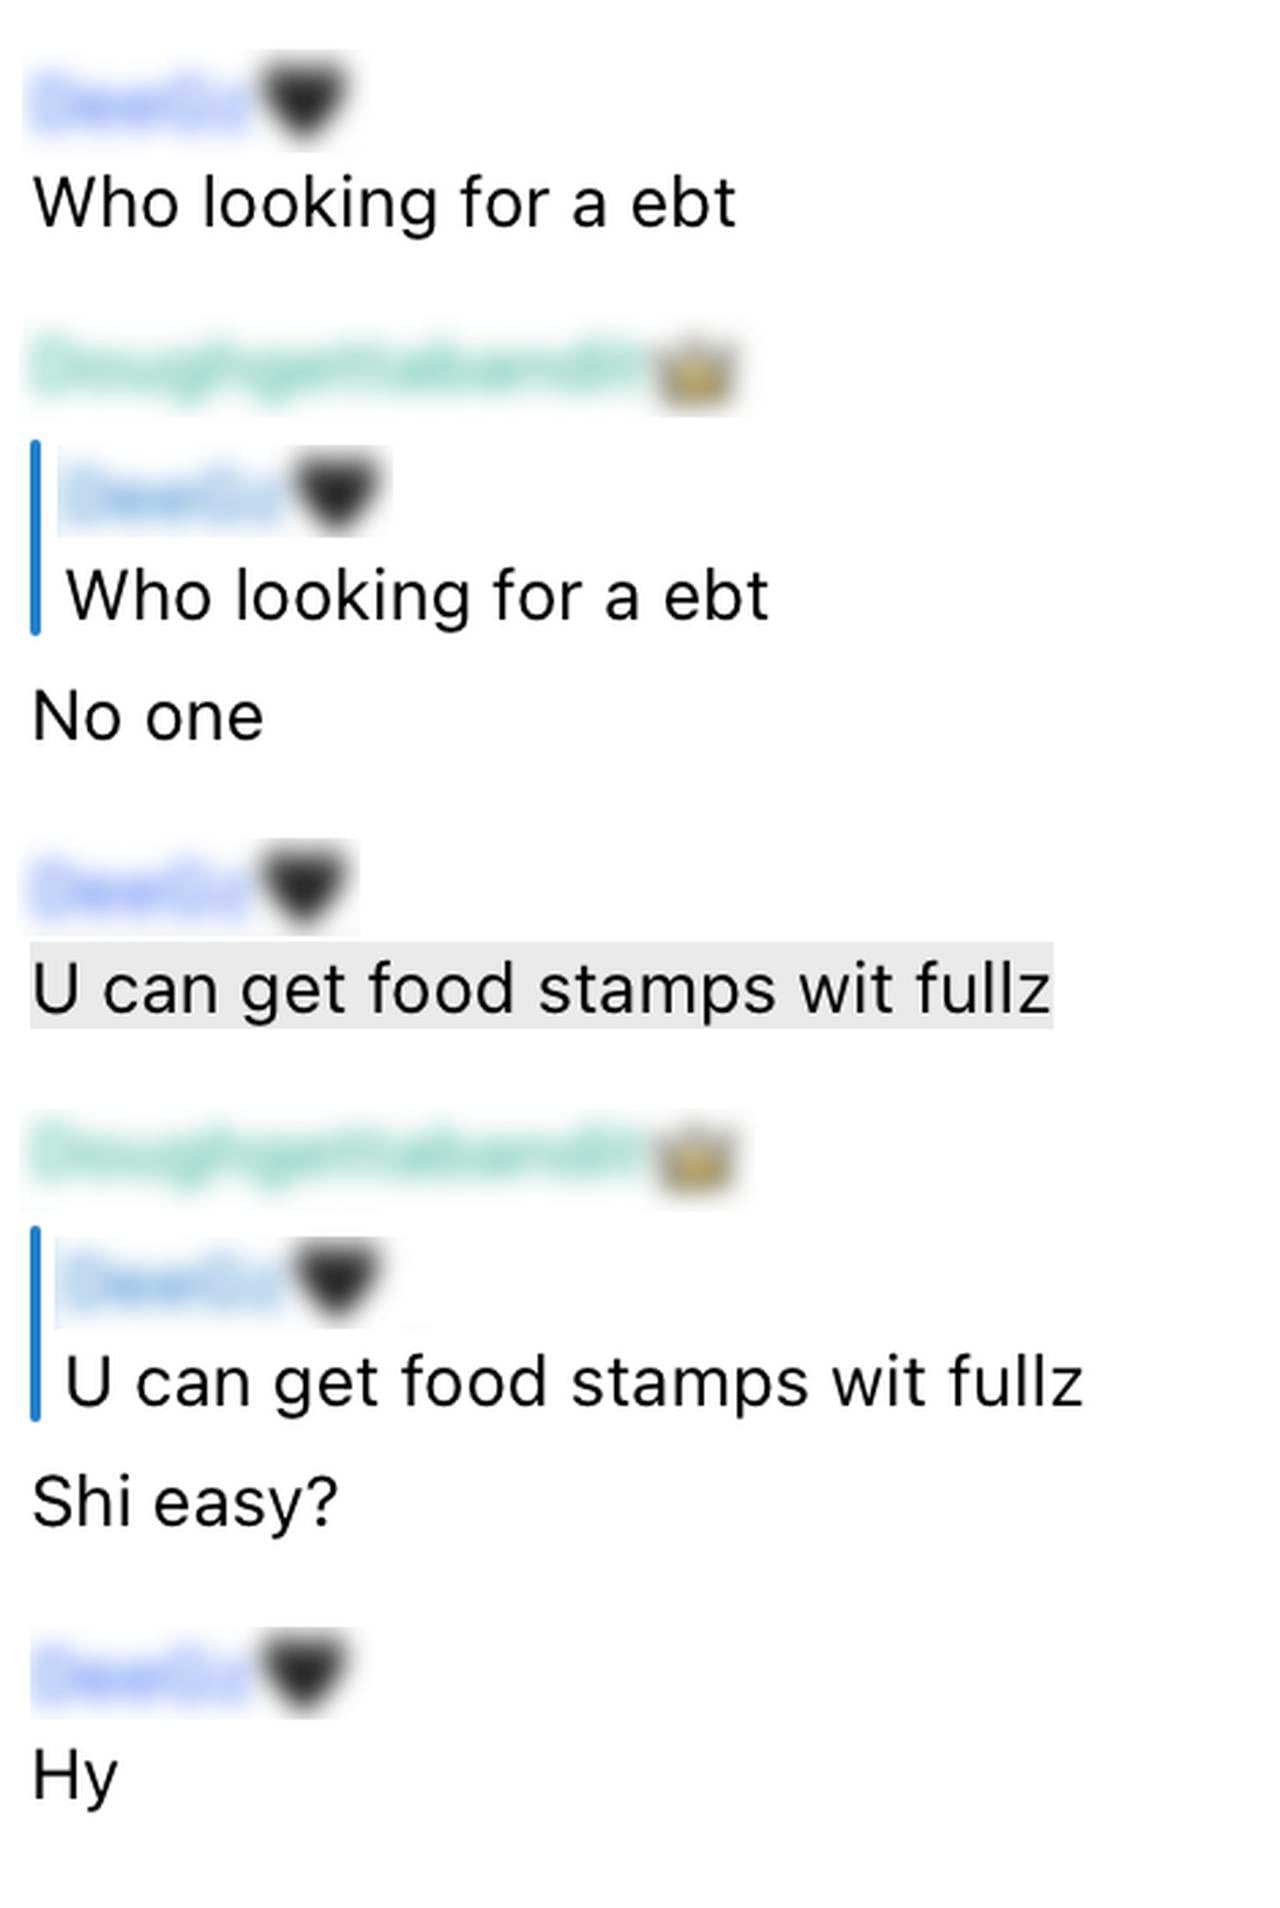 AG warns about SNAP EBT Card text scam